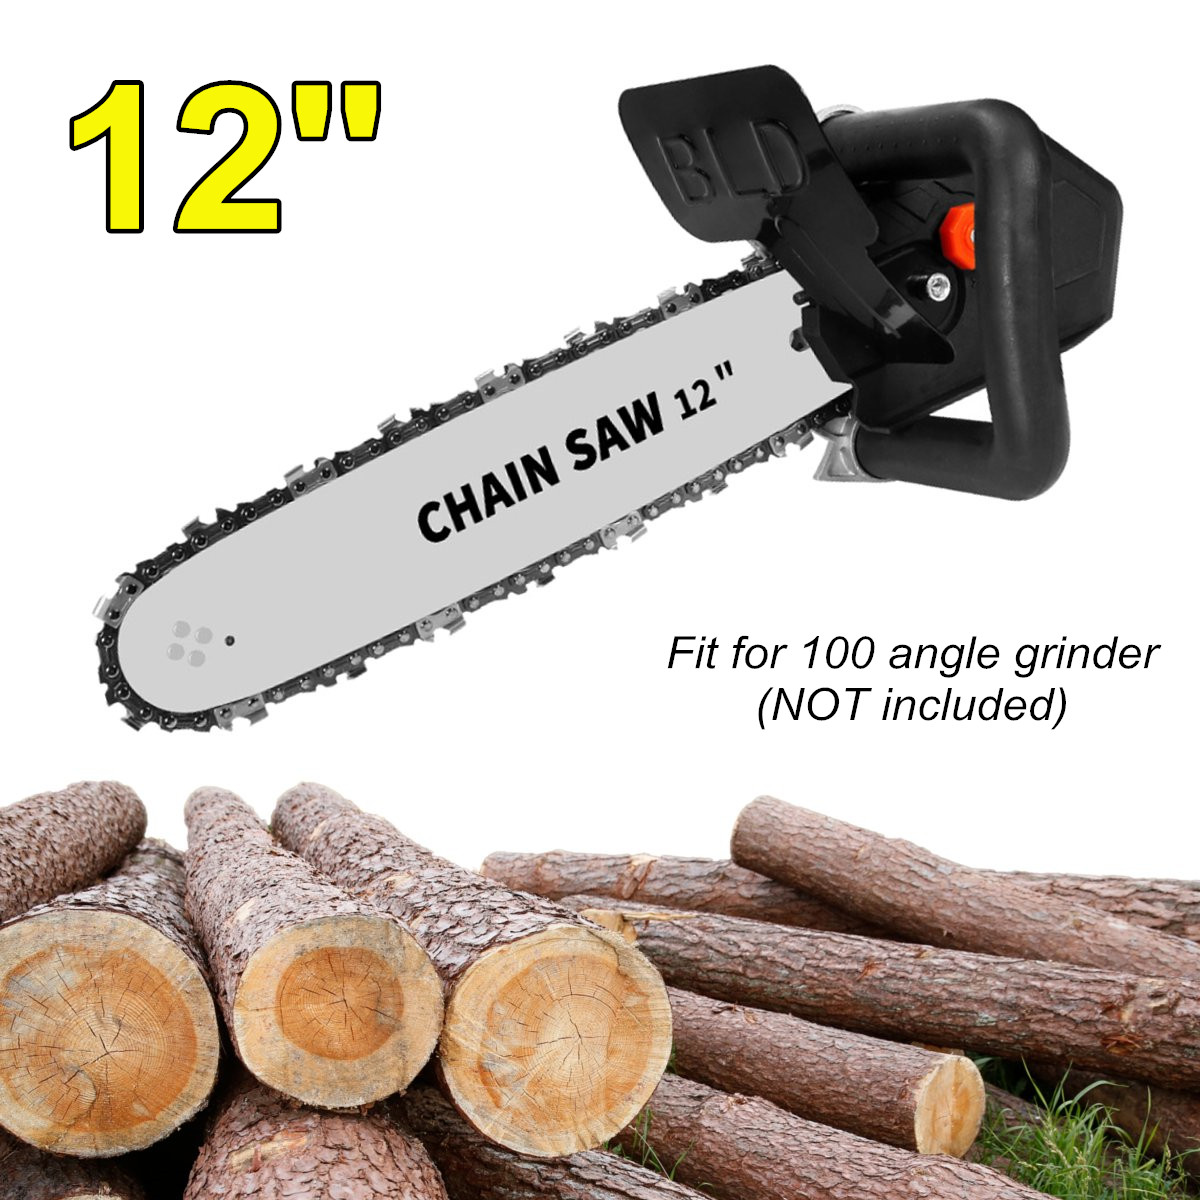 12-Inch-Chainsaw-Bracket-Electric-Chain-Saw-Stand-Set-Part-For-100-Angle-Grinder-1755370-3